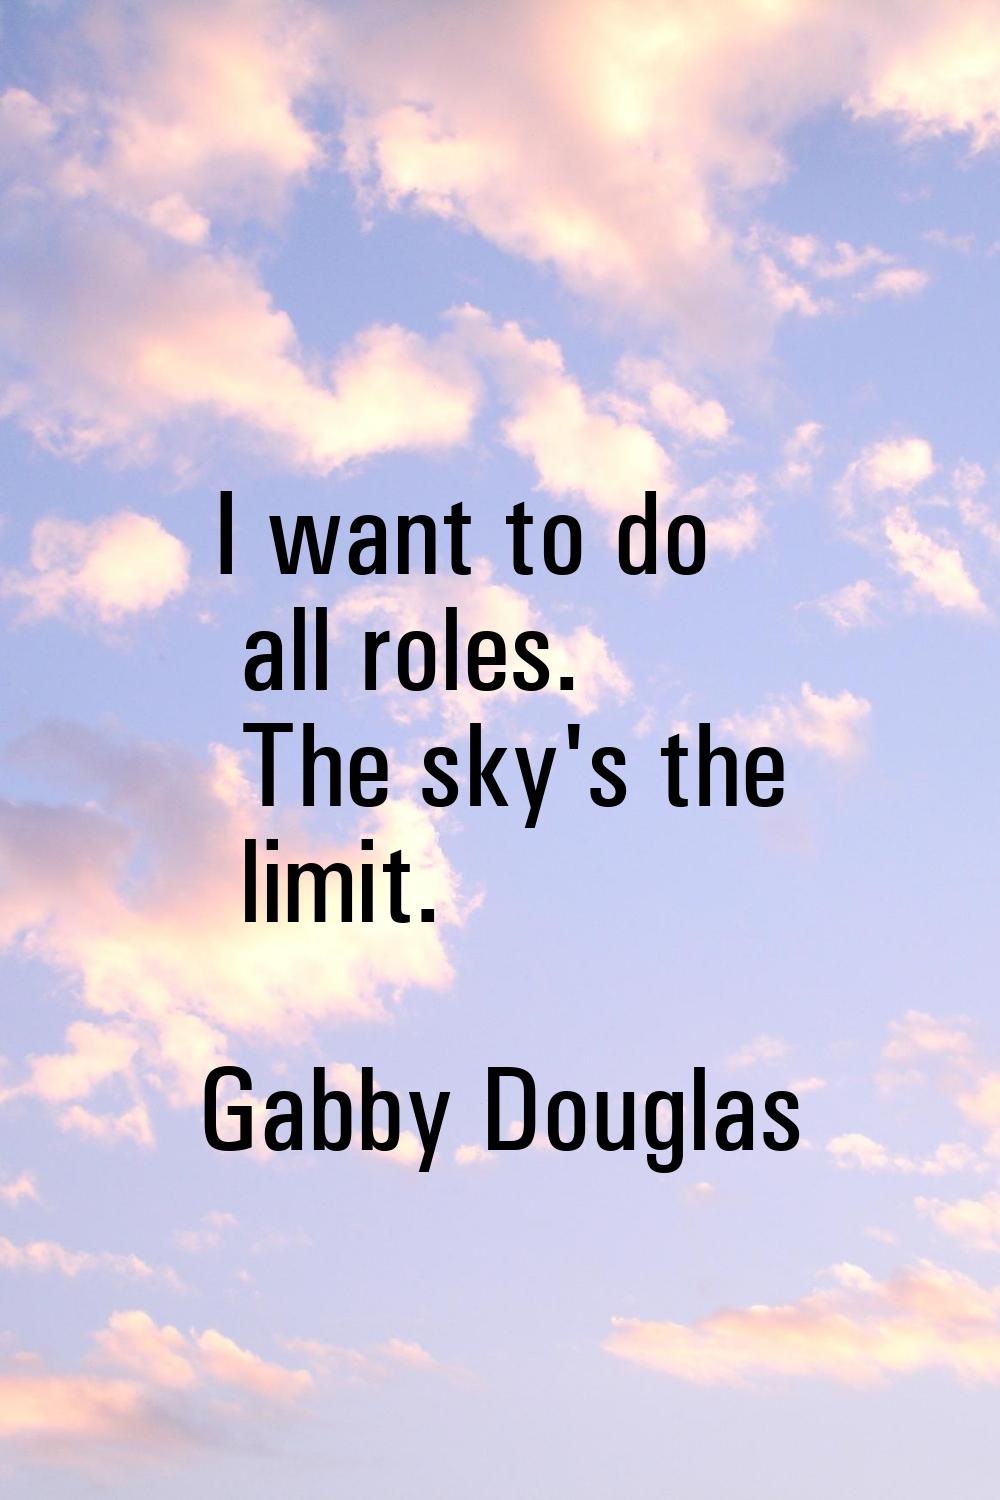 I want to do all roles. The sky's the limit.